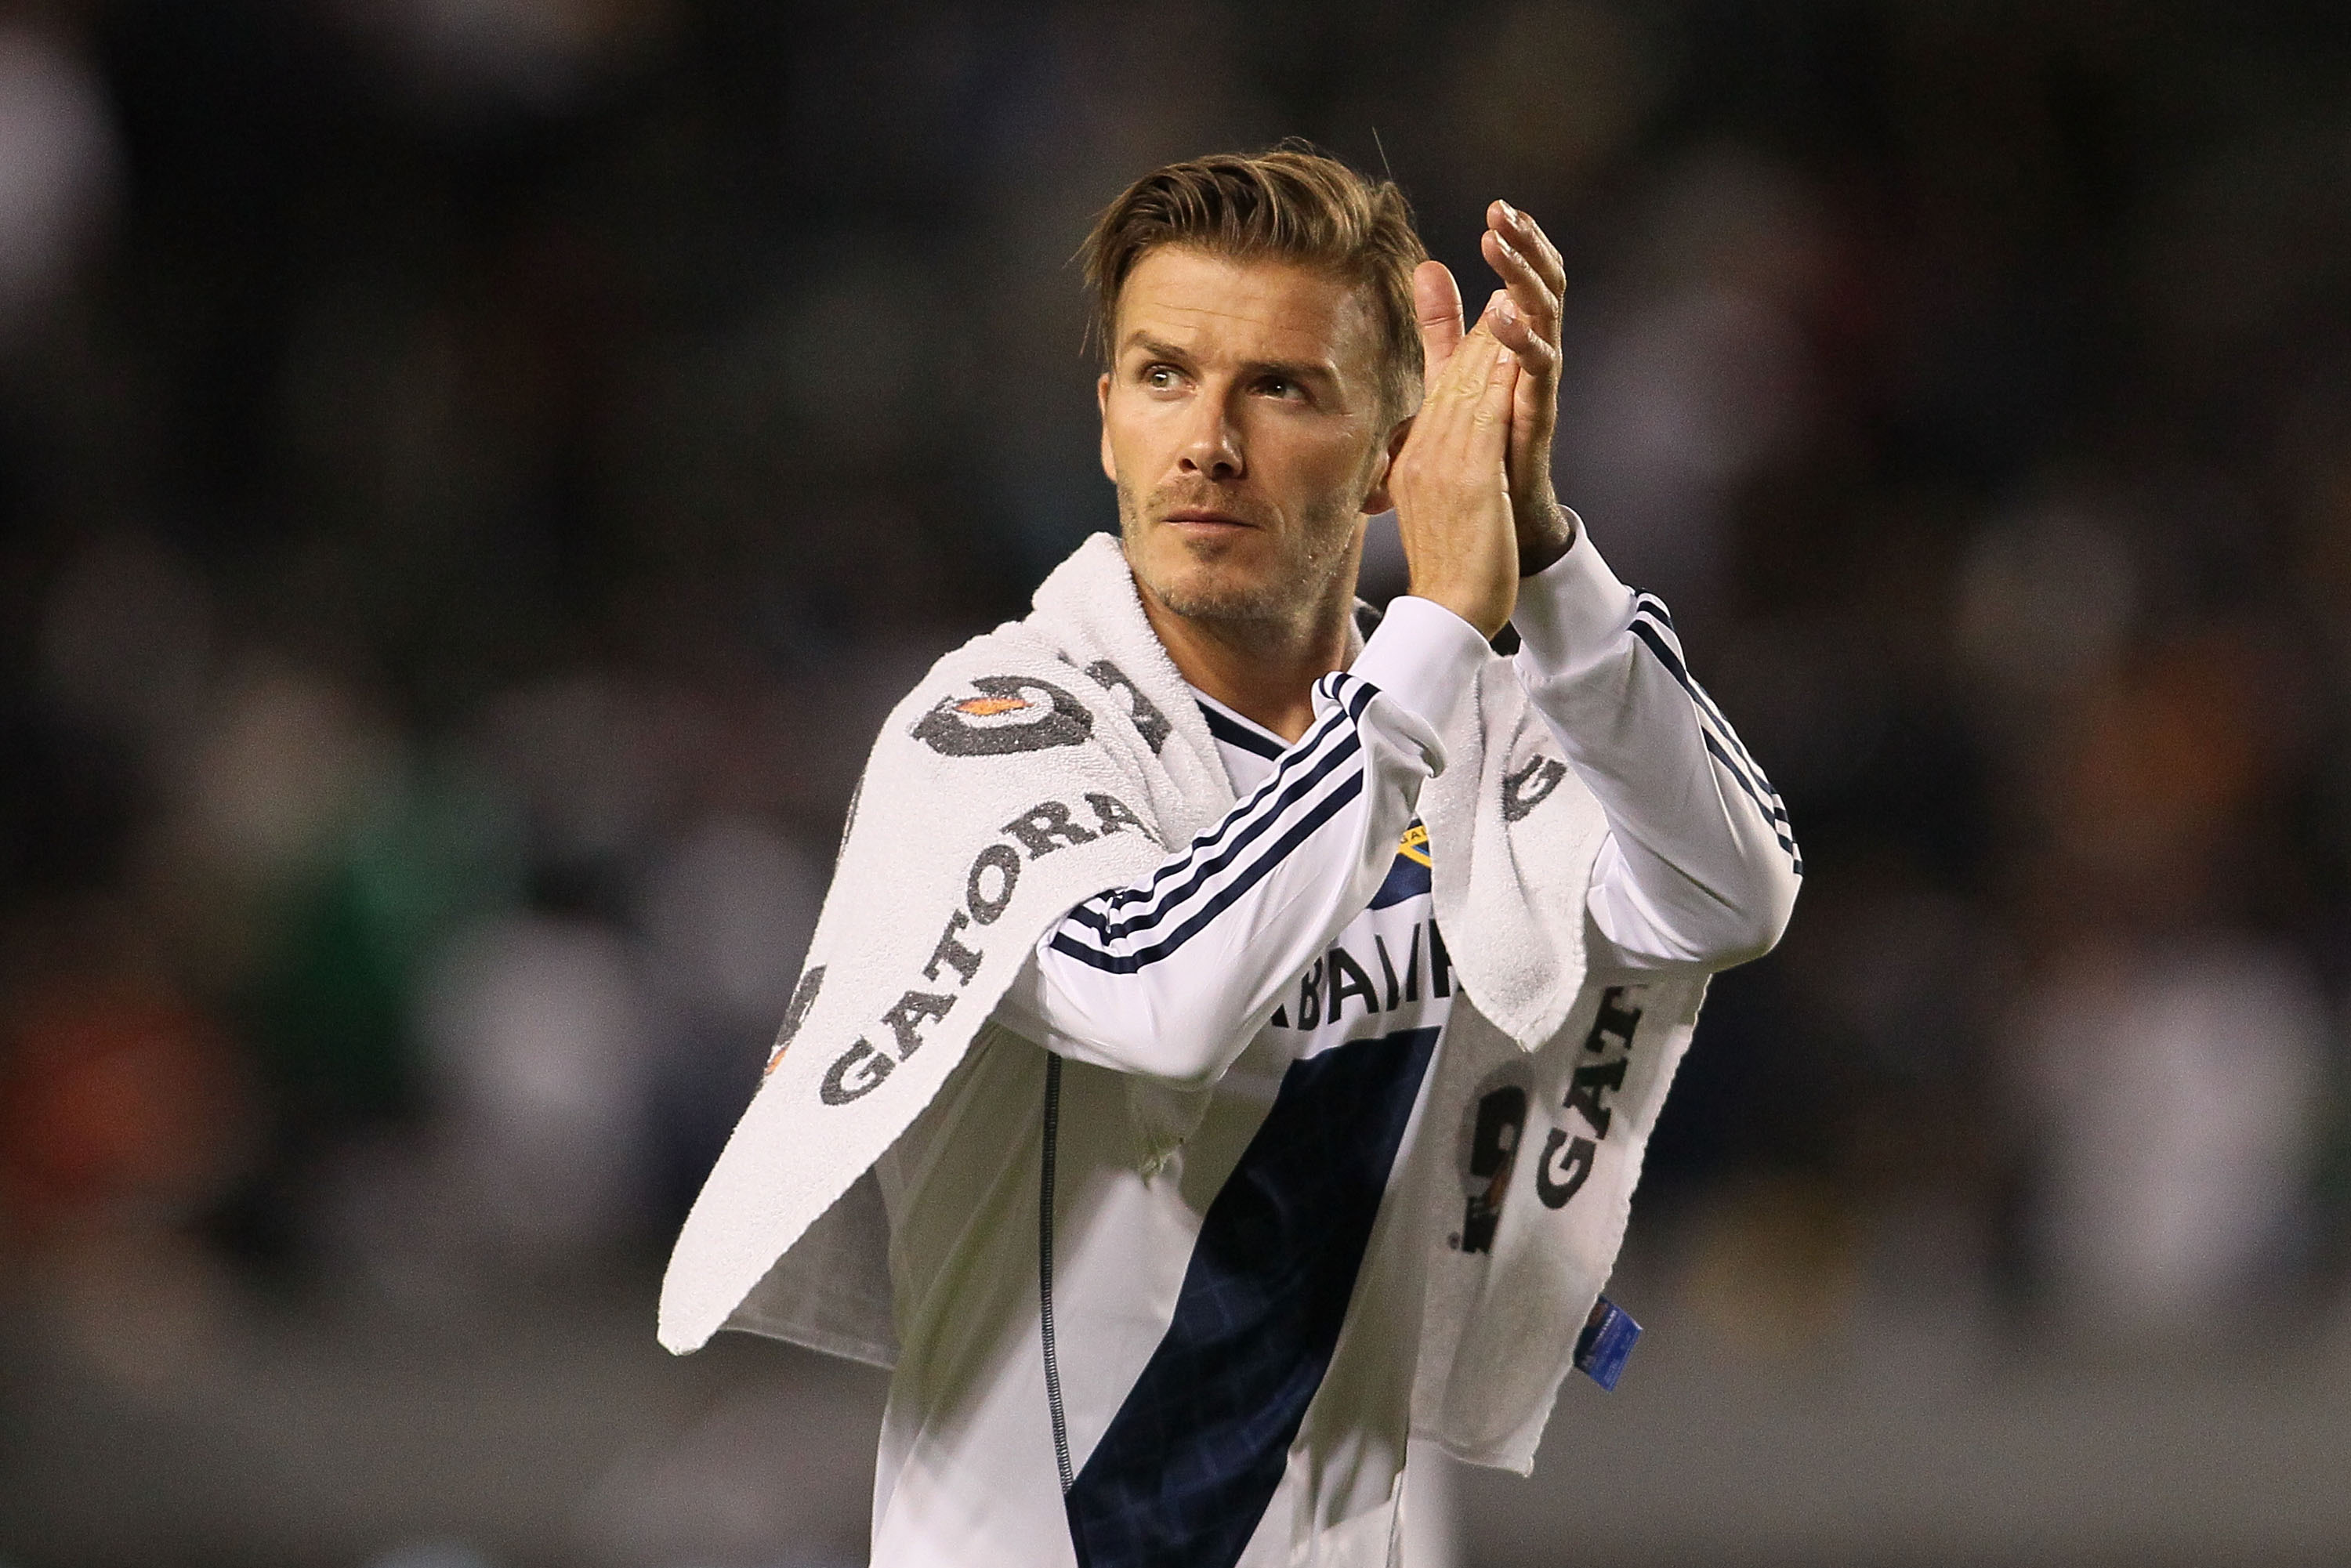 David Beckham's Legacy with LA Galaxy More Complex Than Success on